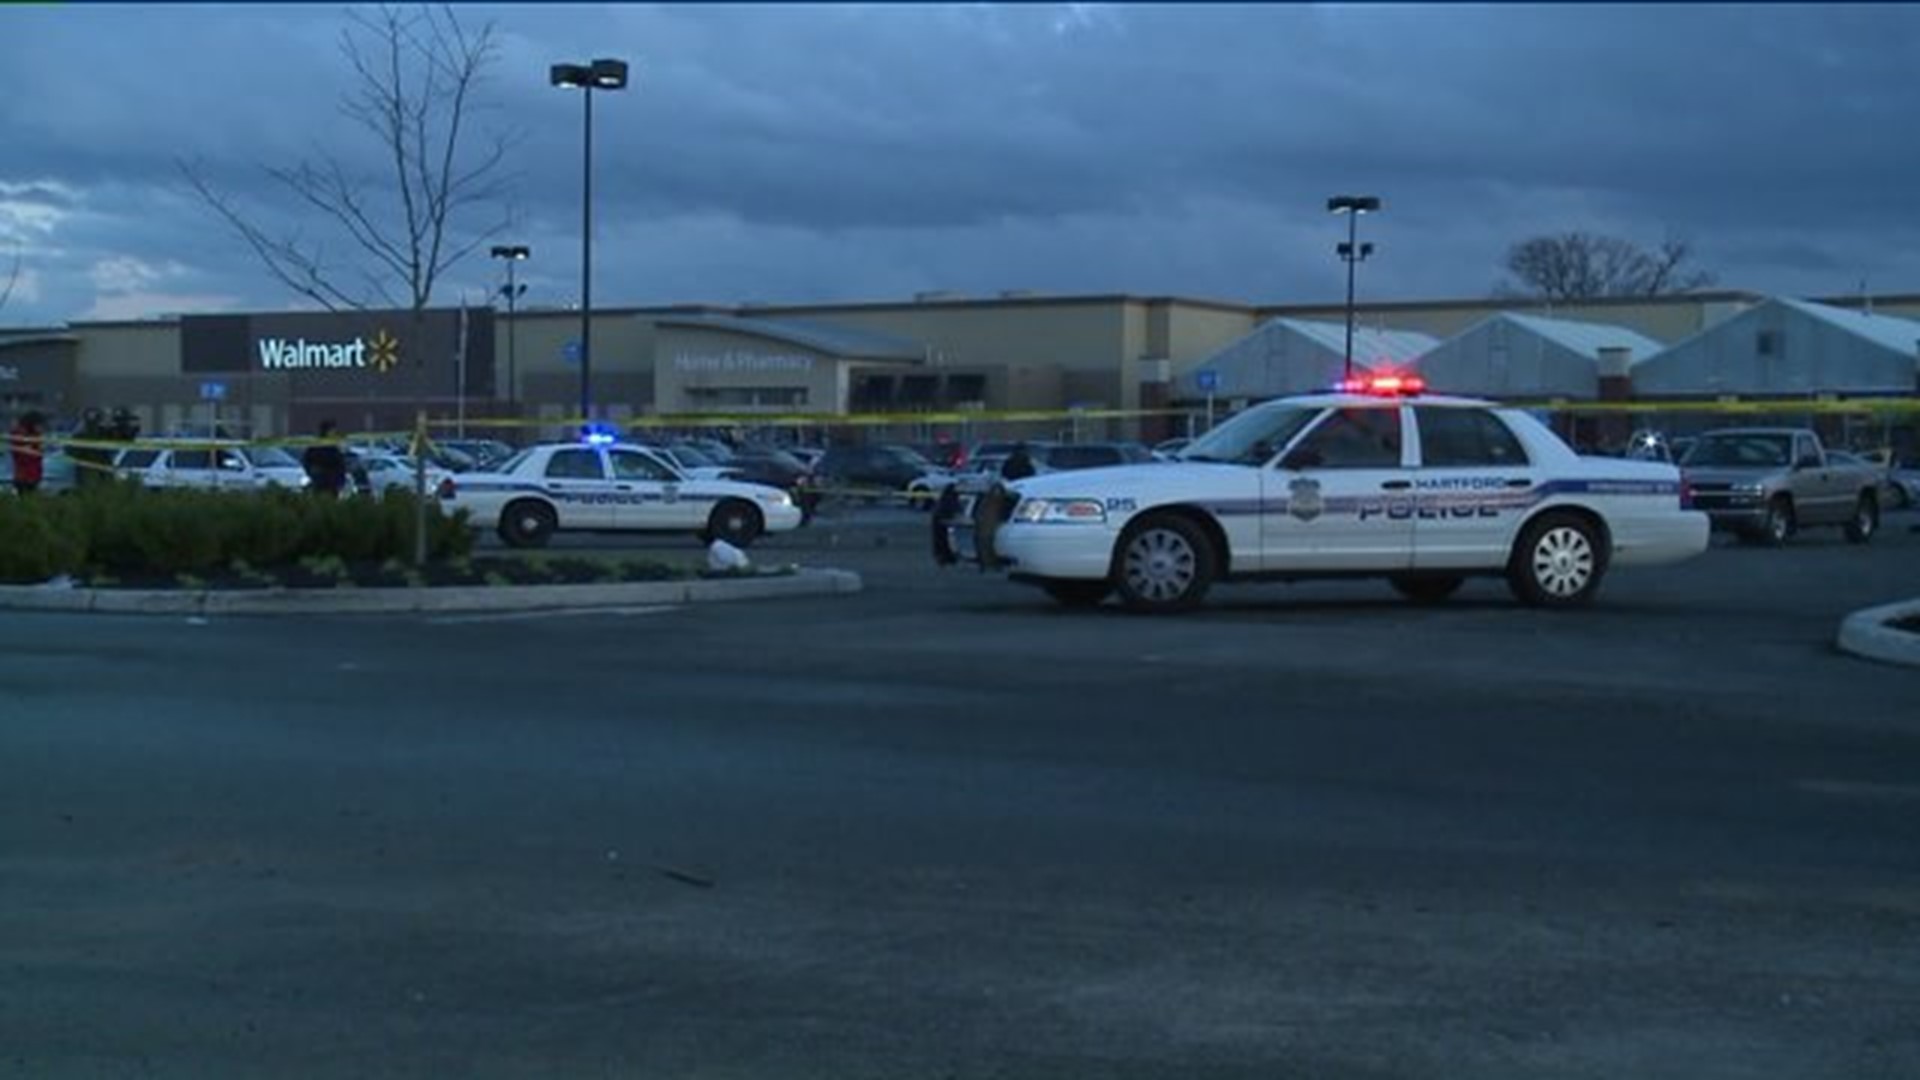 Fear for customers of Hartford Walmart after shooting in parking lot